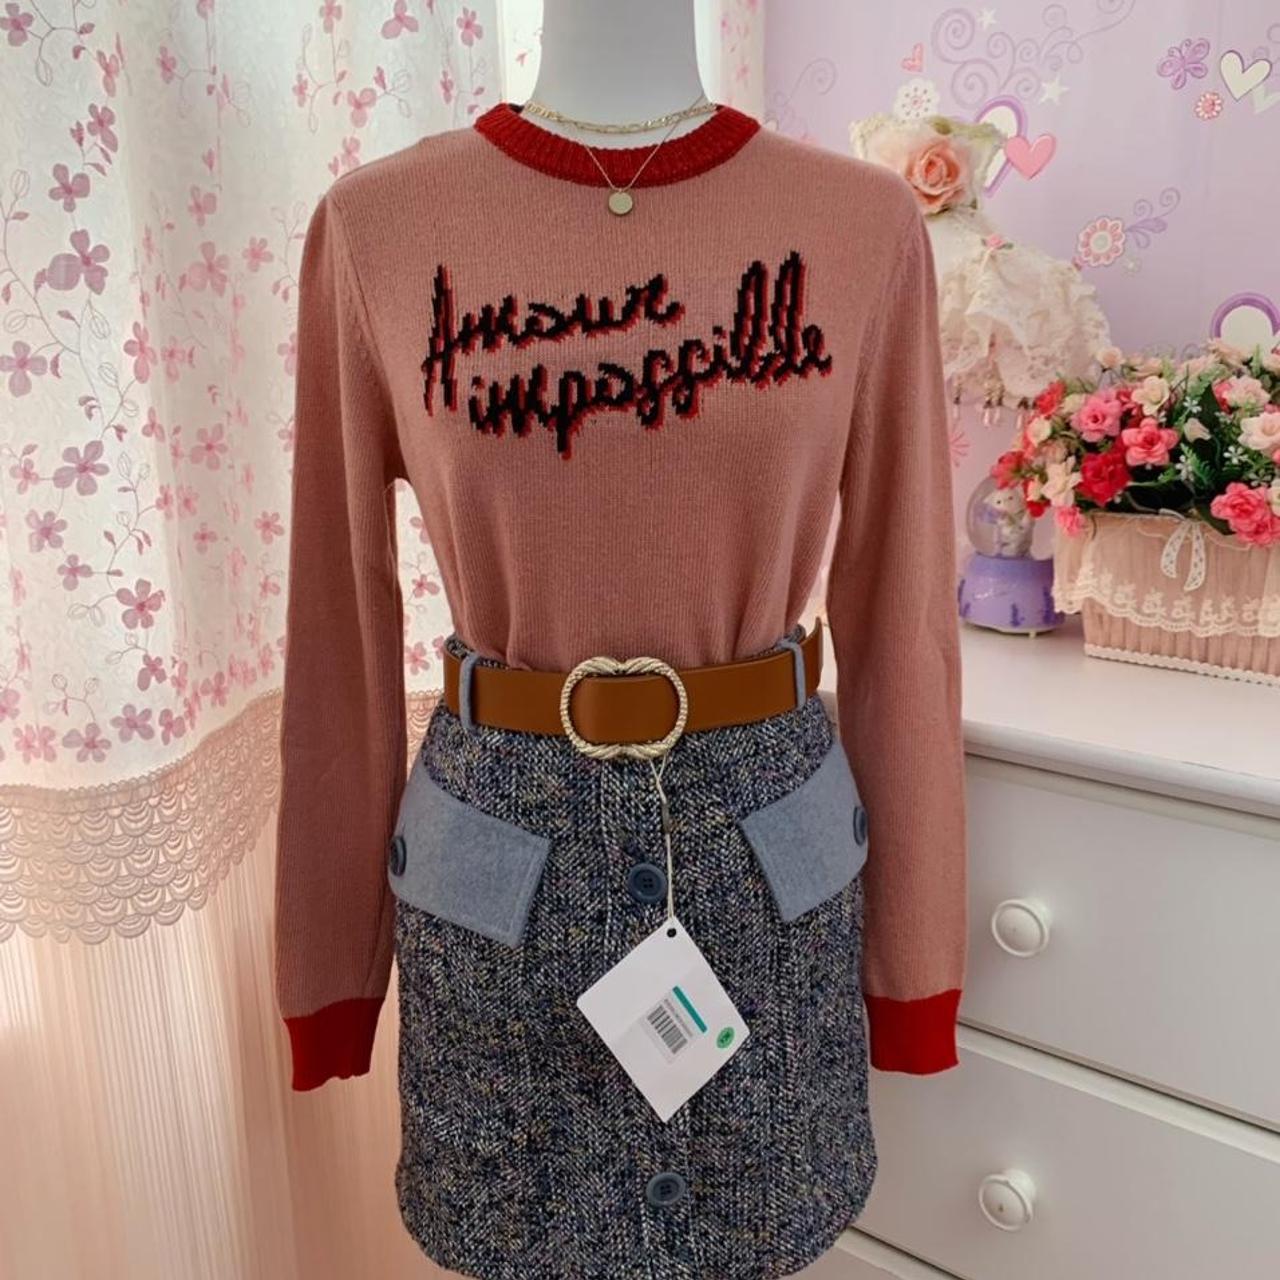 Product Image 2 - Pinko Amour impossible intarsia jumper
Brand